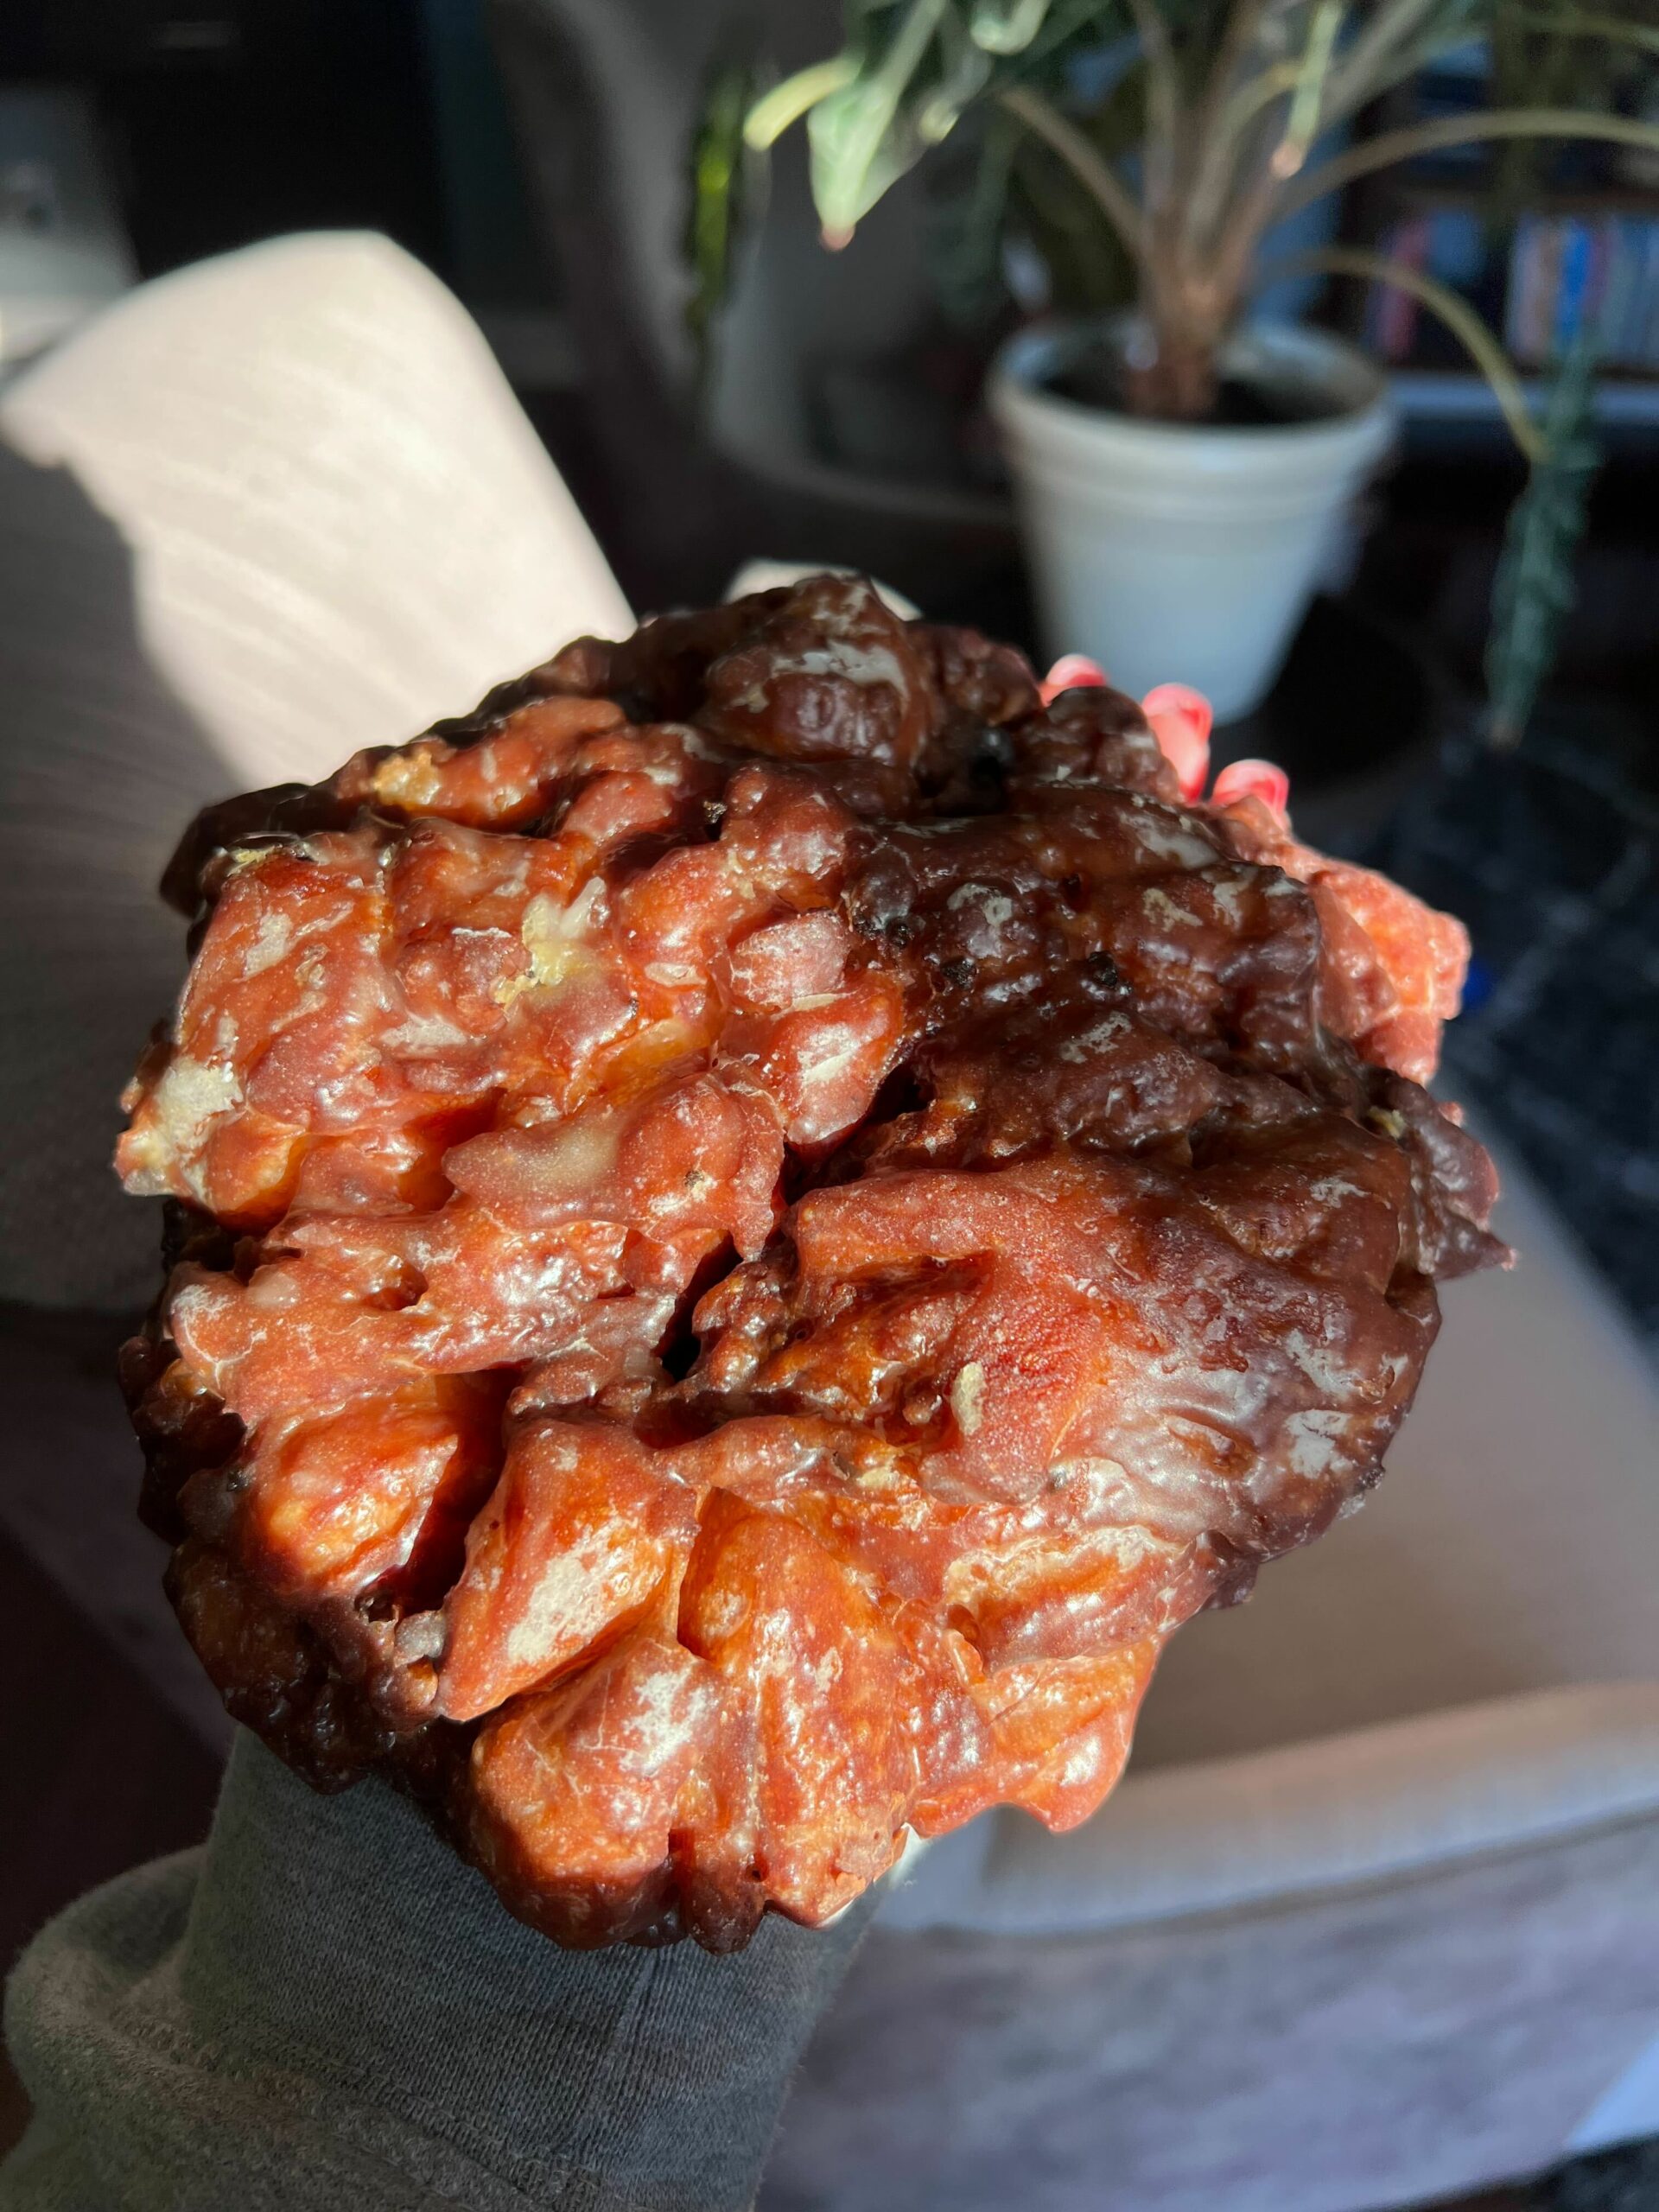 Tan’s Donut’s blueberry fritter is many, many delicious bites, full of blueberry and sweet glaze. (Lonnie Hayes) 